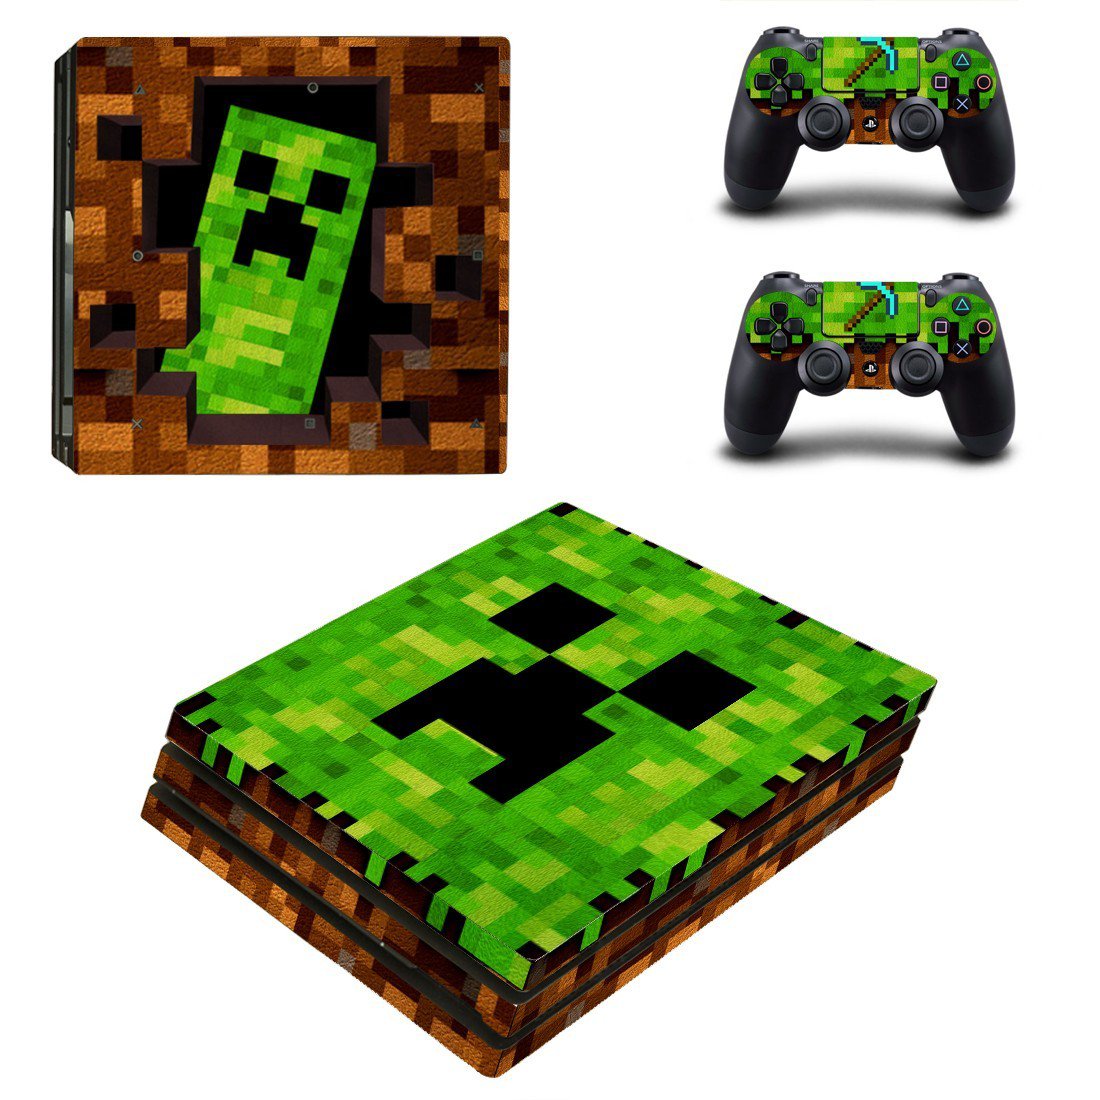 Minecraft And Controllers Skin Sticker For Ps4 Pro Consoleskins Co